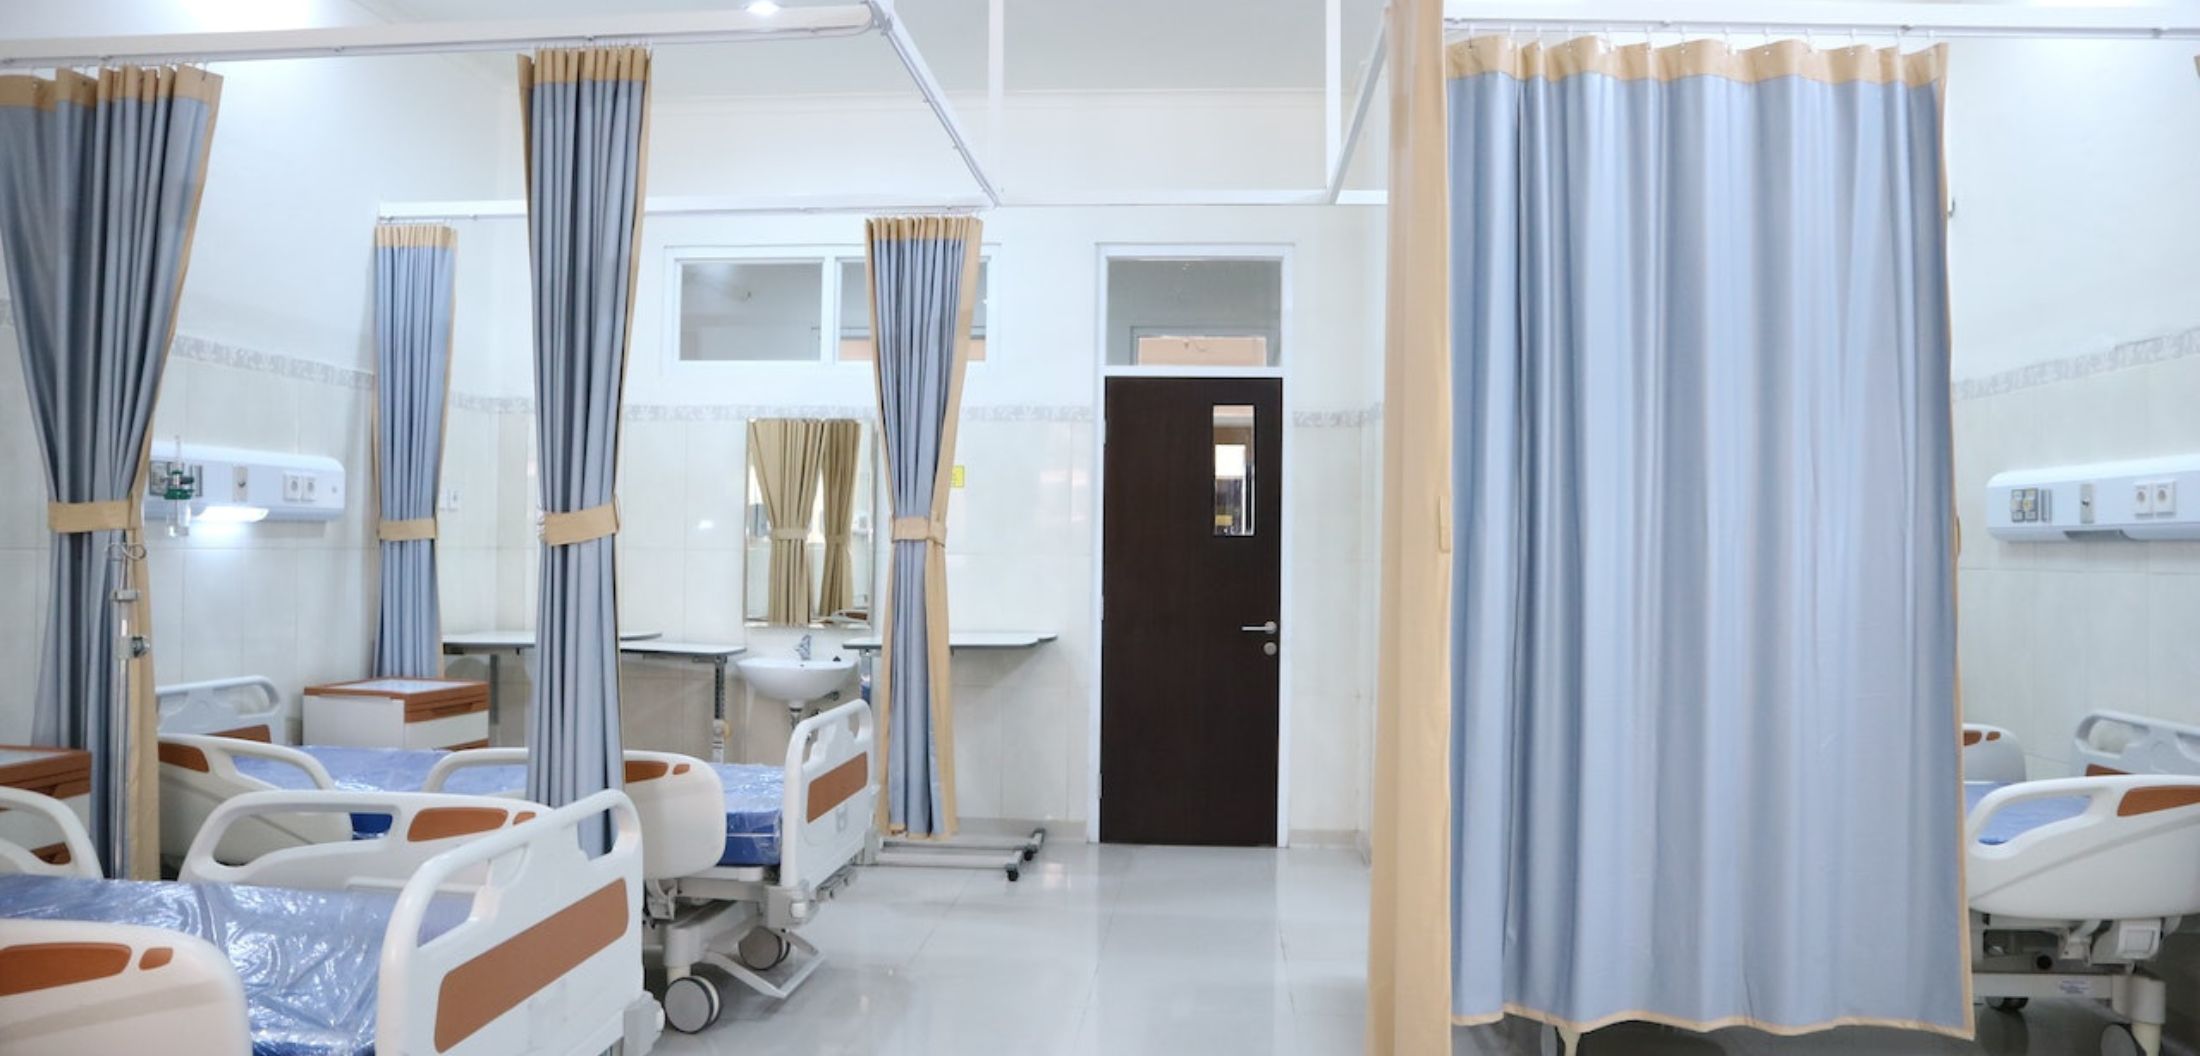 Buy Blue medical curtains for hospitals in dubai at best rate